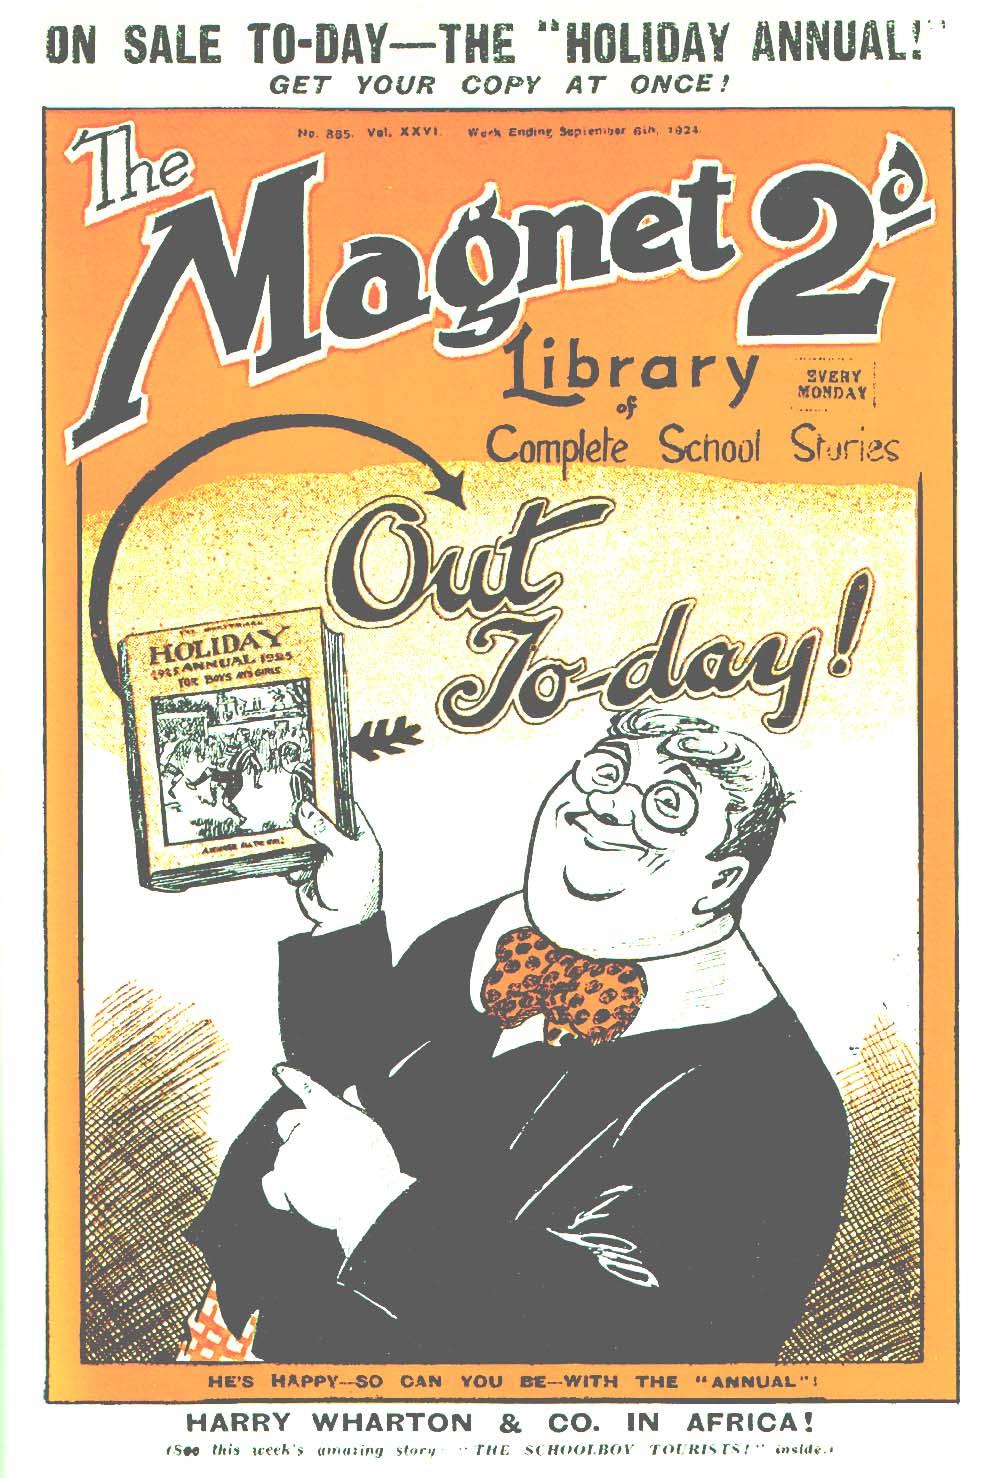 Book Cover For The Magnet 865 - The Schoolboy Tourists!